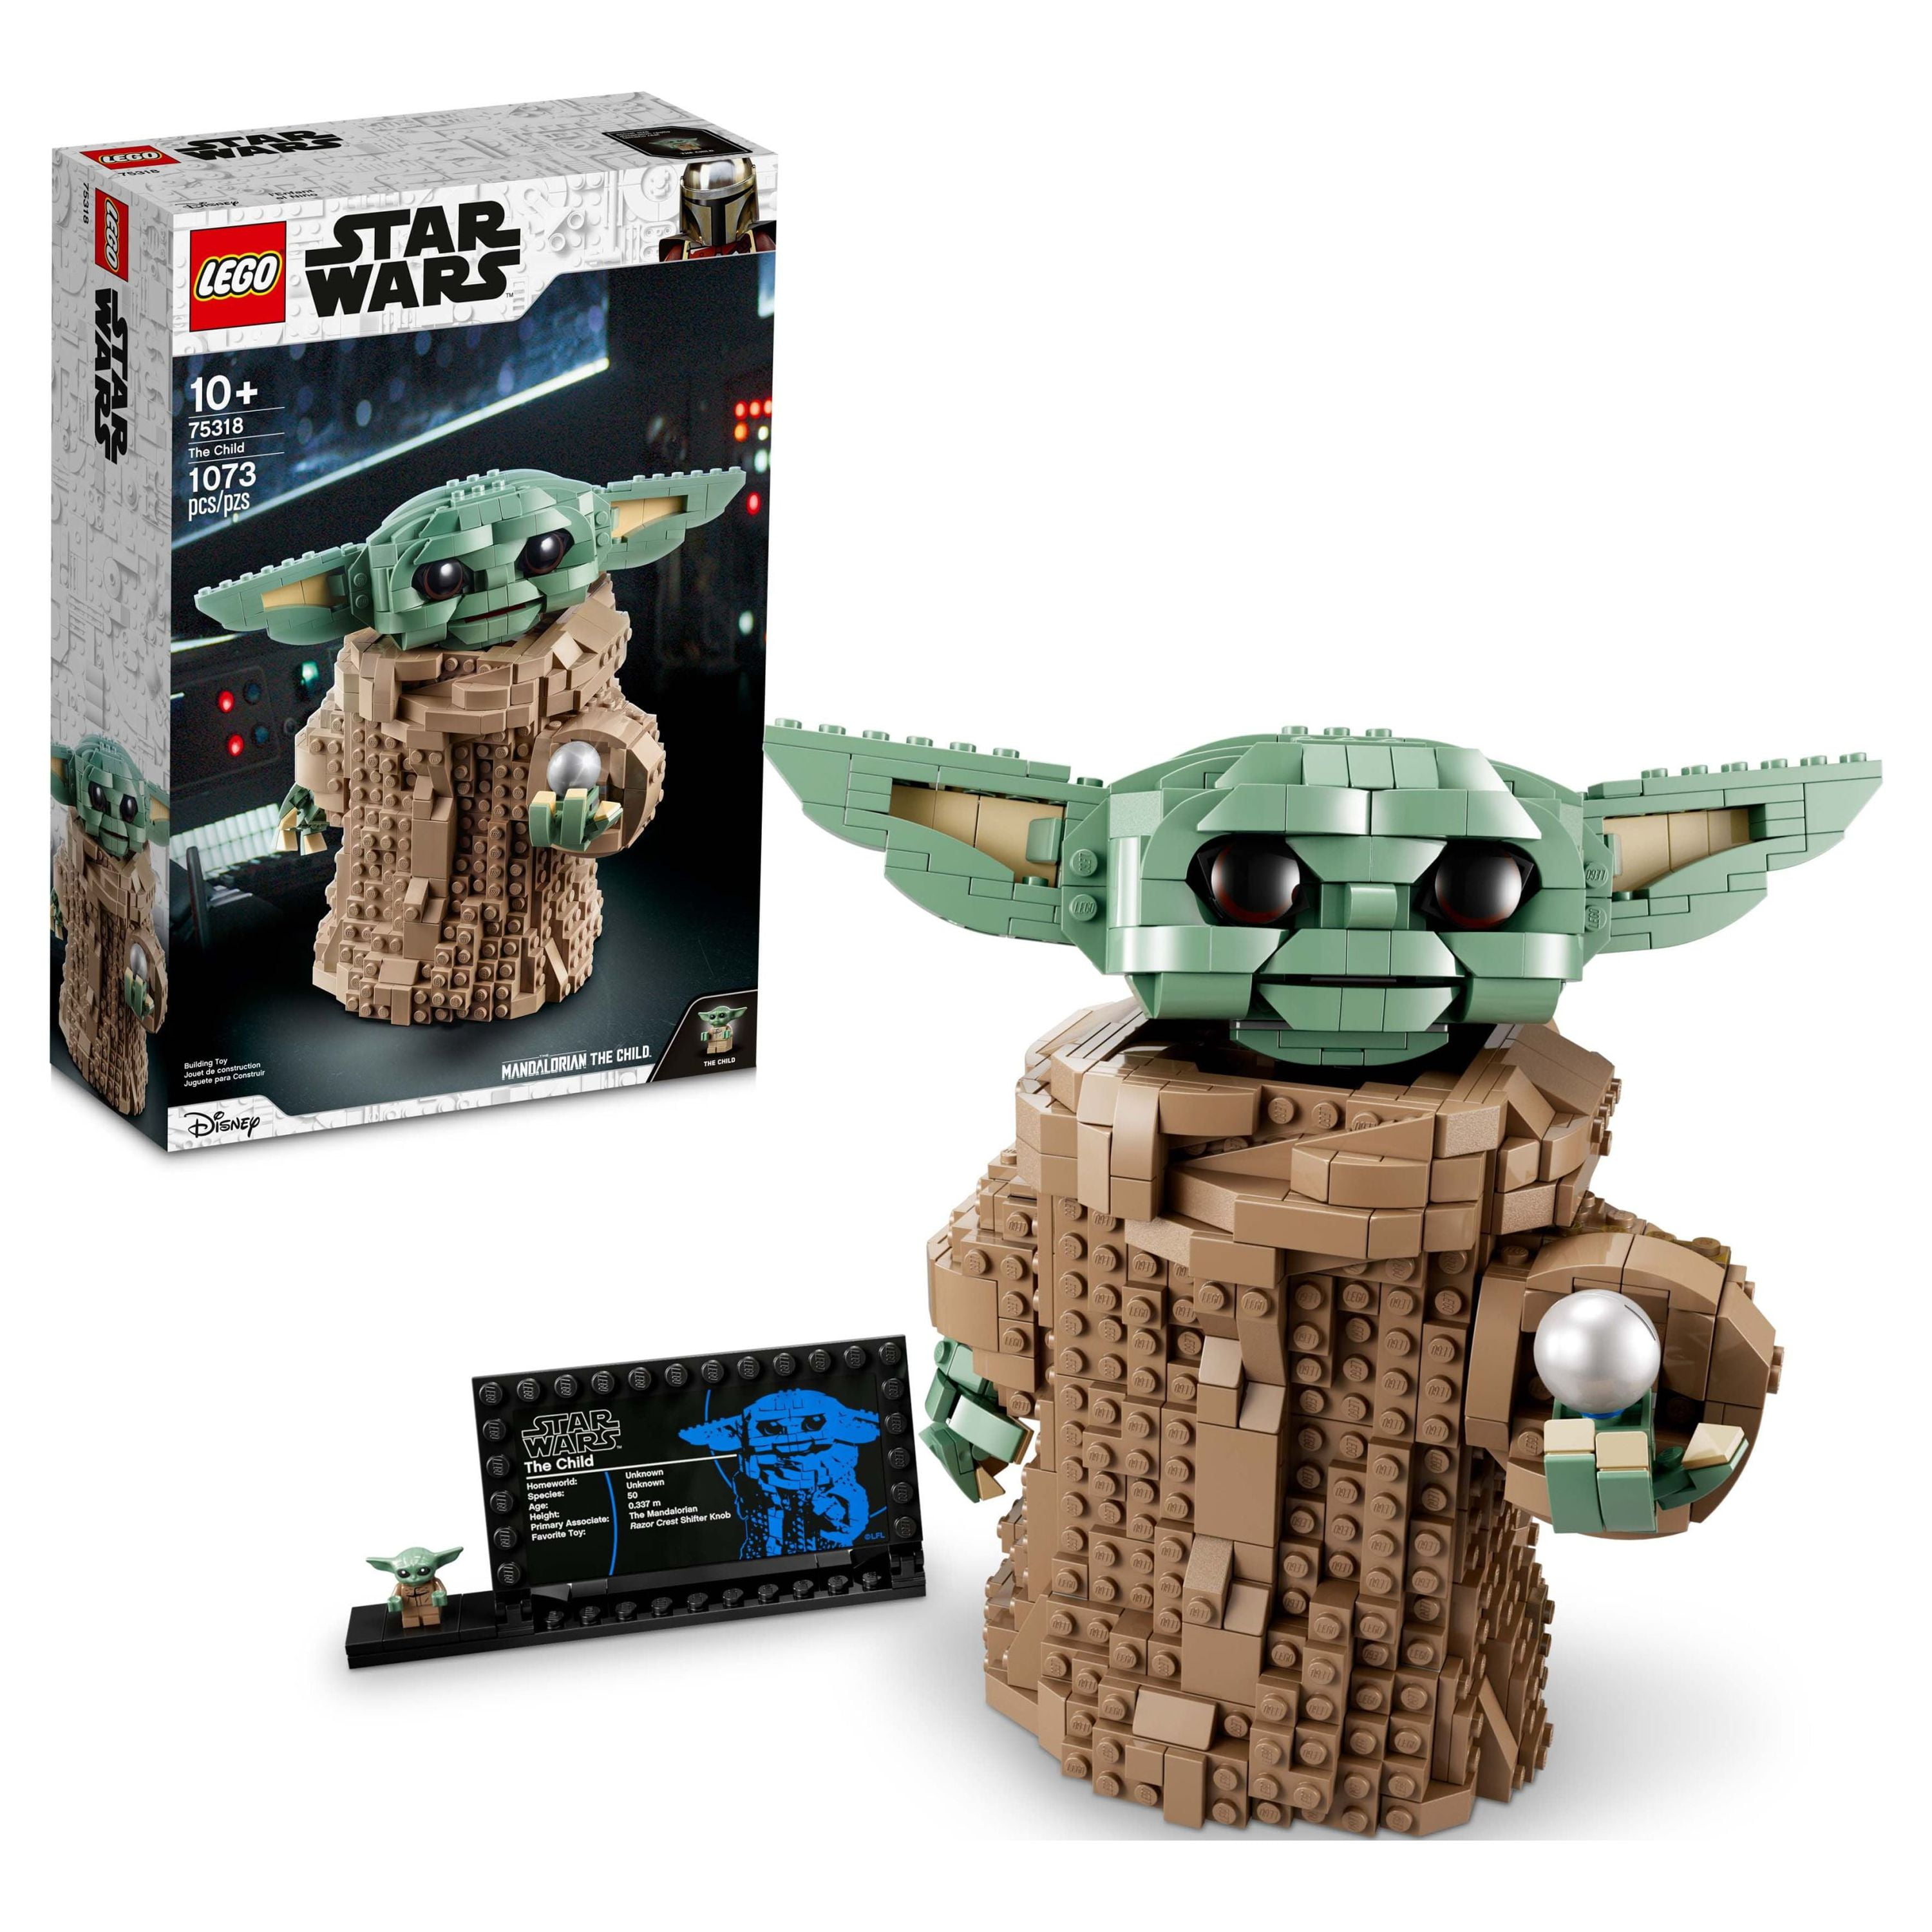 LEGO Star Wars: The Clone Wars Yoda’s Jedi Starfighter 75360 Star Wars  Collectible for Kids Featuring Master Yoda Figure with Lightsaber Toy,  Birthday